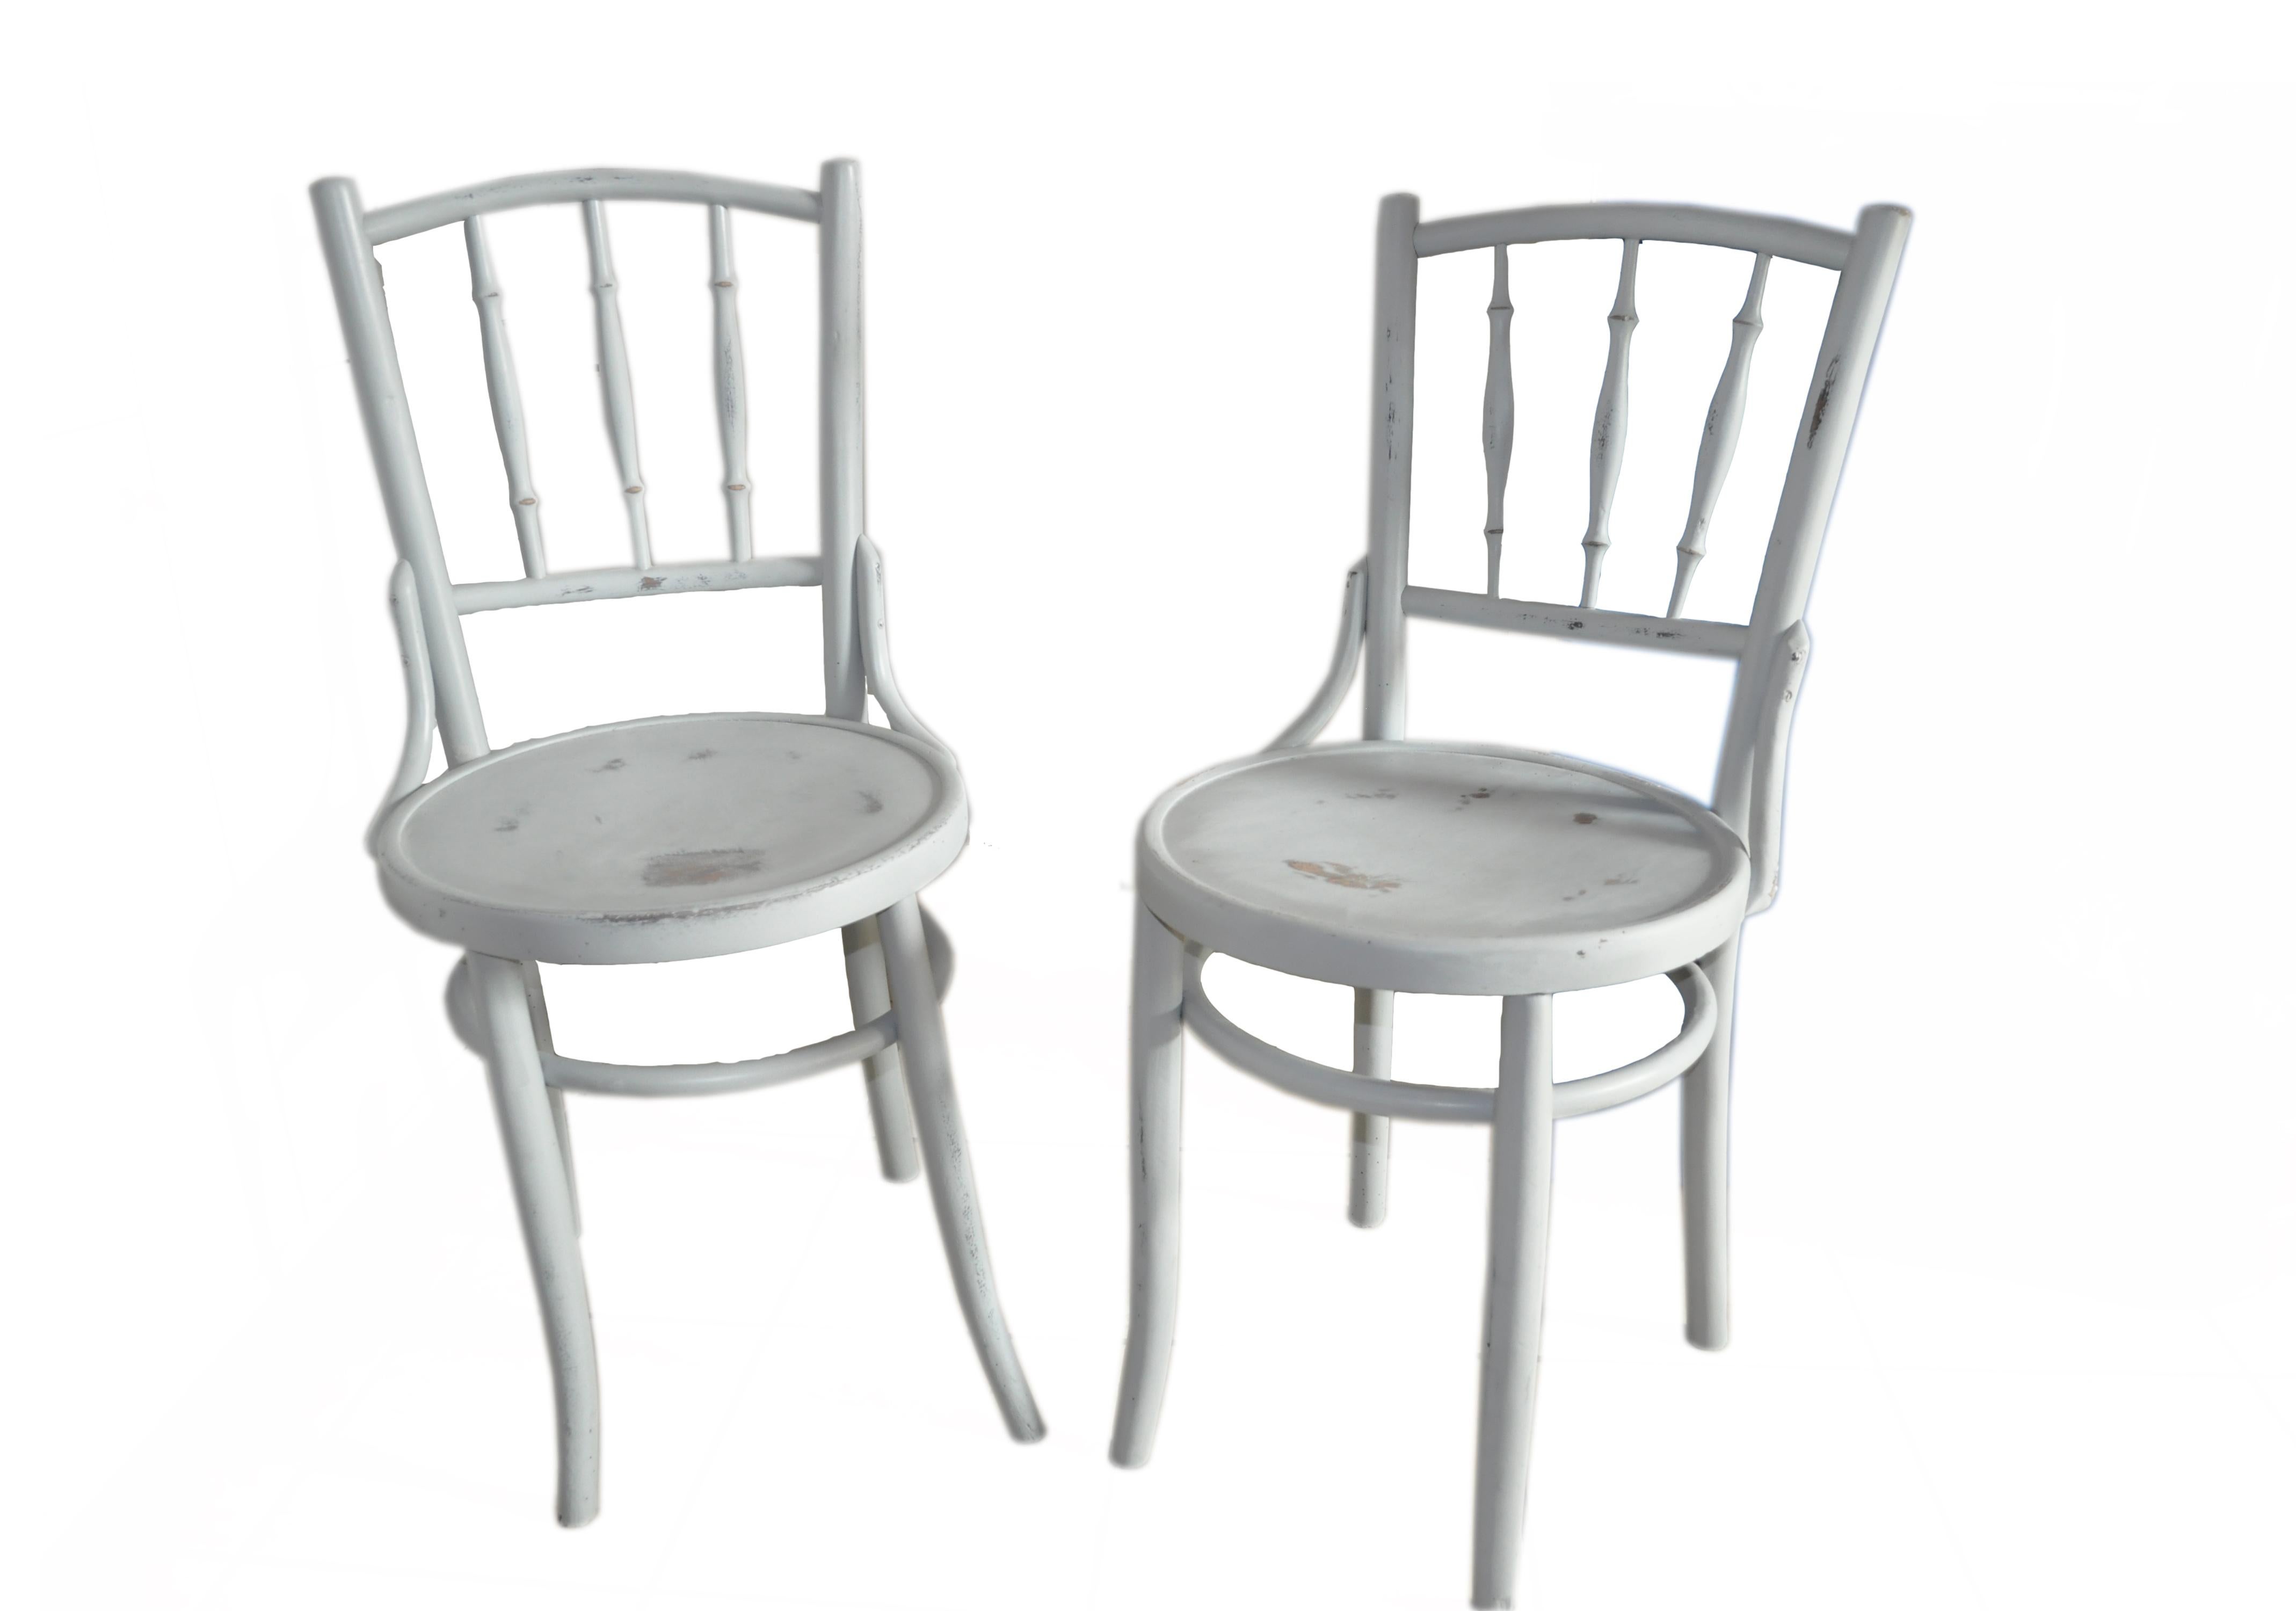 Pair of Thonet Bistro Gray Chair, circa 1900 For Sale 4